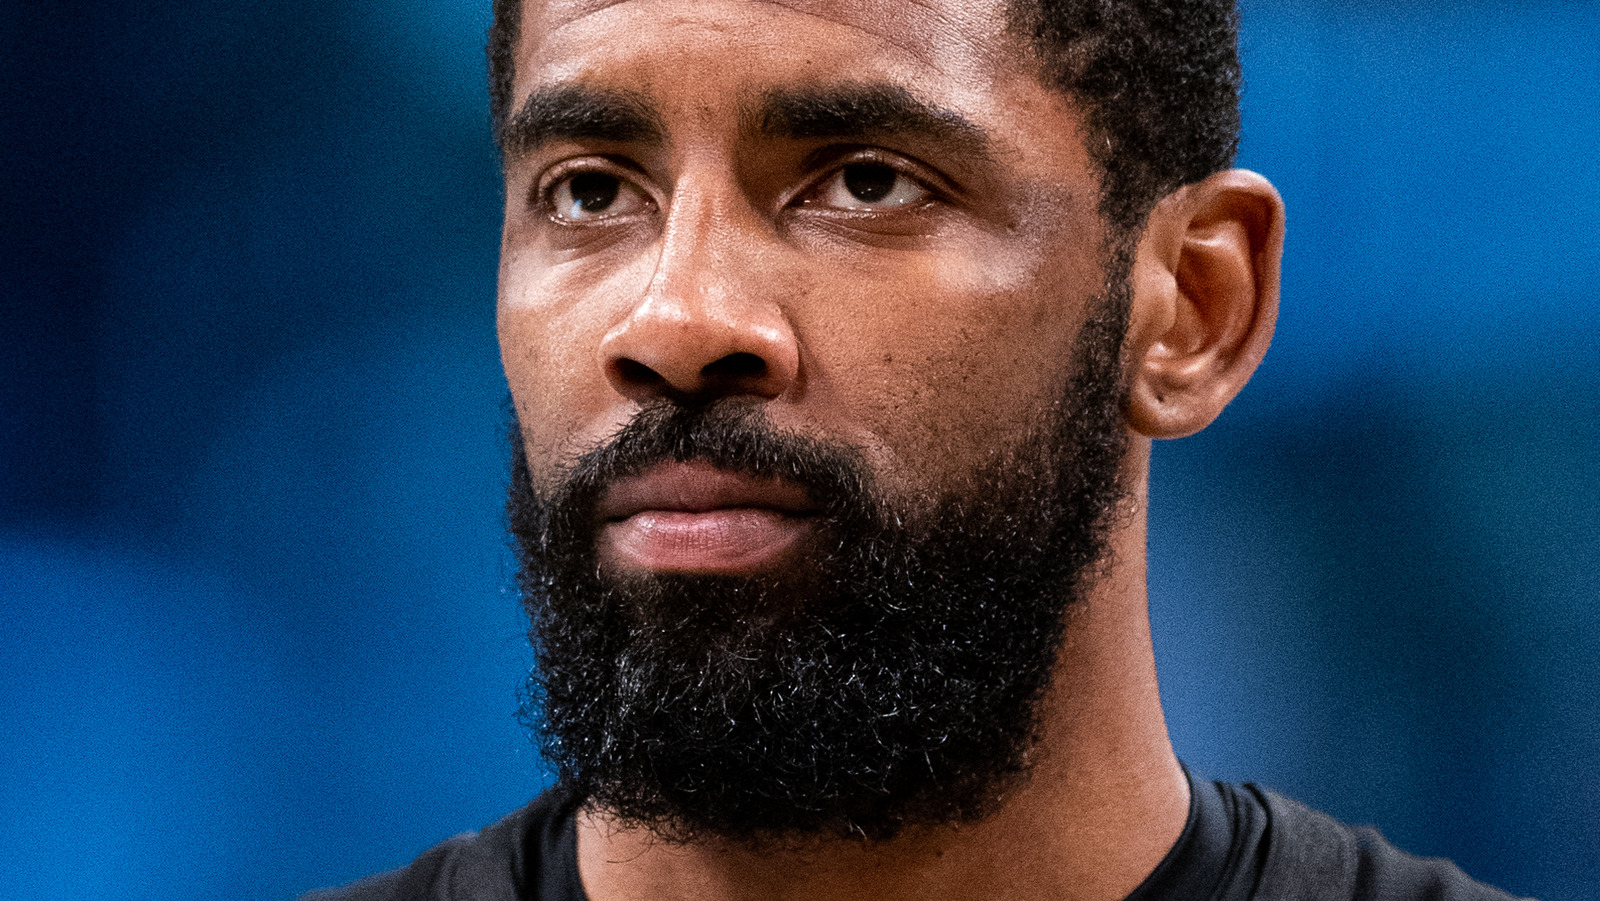 Kyrie Irving's Partnership With Nike Appears To Reach Point Of No Return